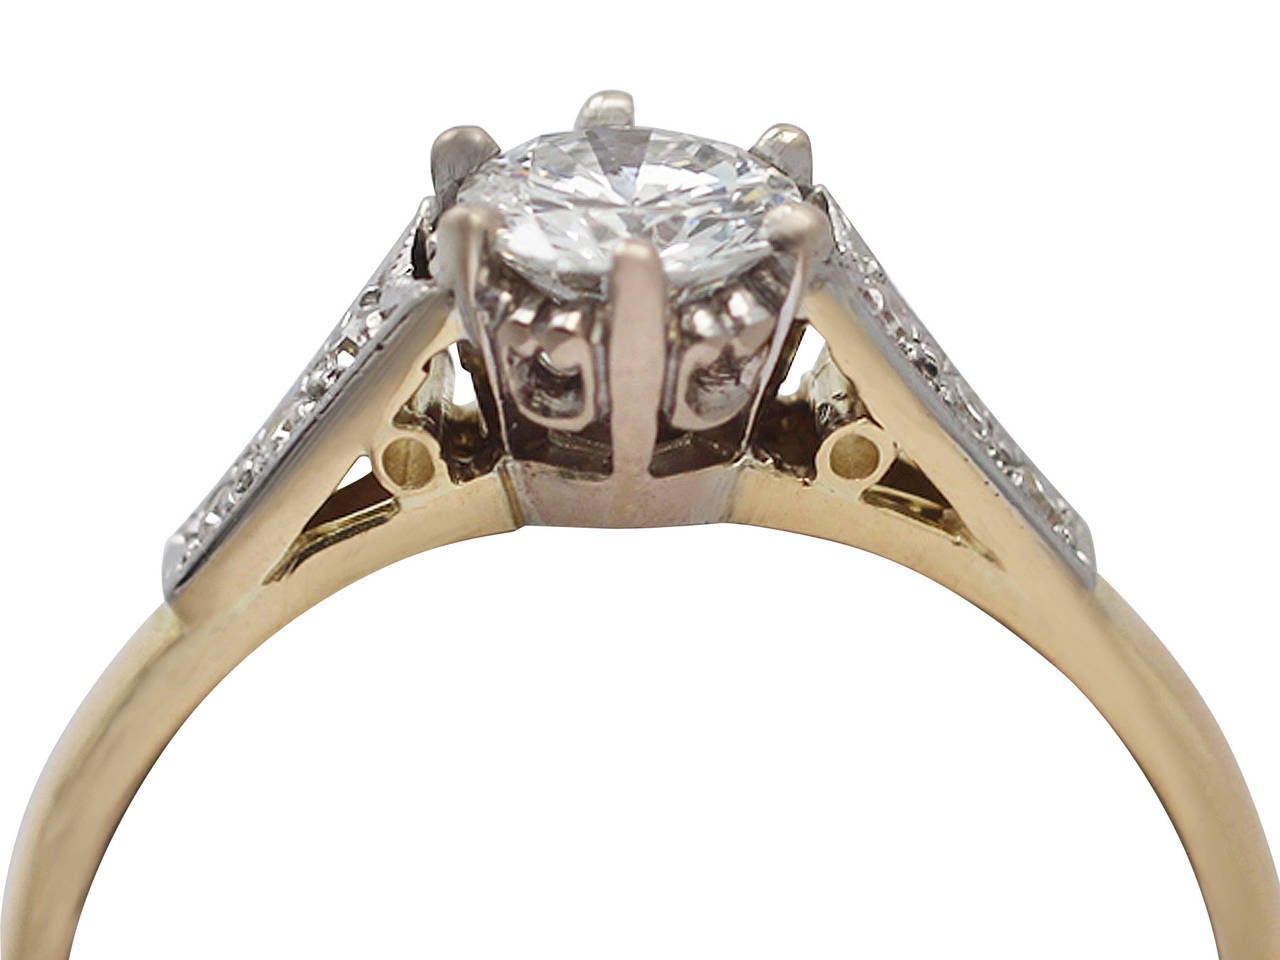 A fine and impressive vintage 0.70 carat diamond (total) and 18 karat yellow gold, platinum set solitaire ring; part our diamond jewelry and estate jewelry collections

This impressive vintage diamond solitaire ring has been crafted in 18k yellow